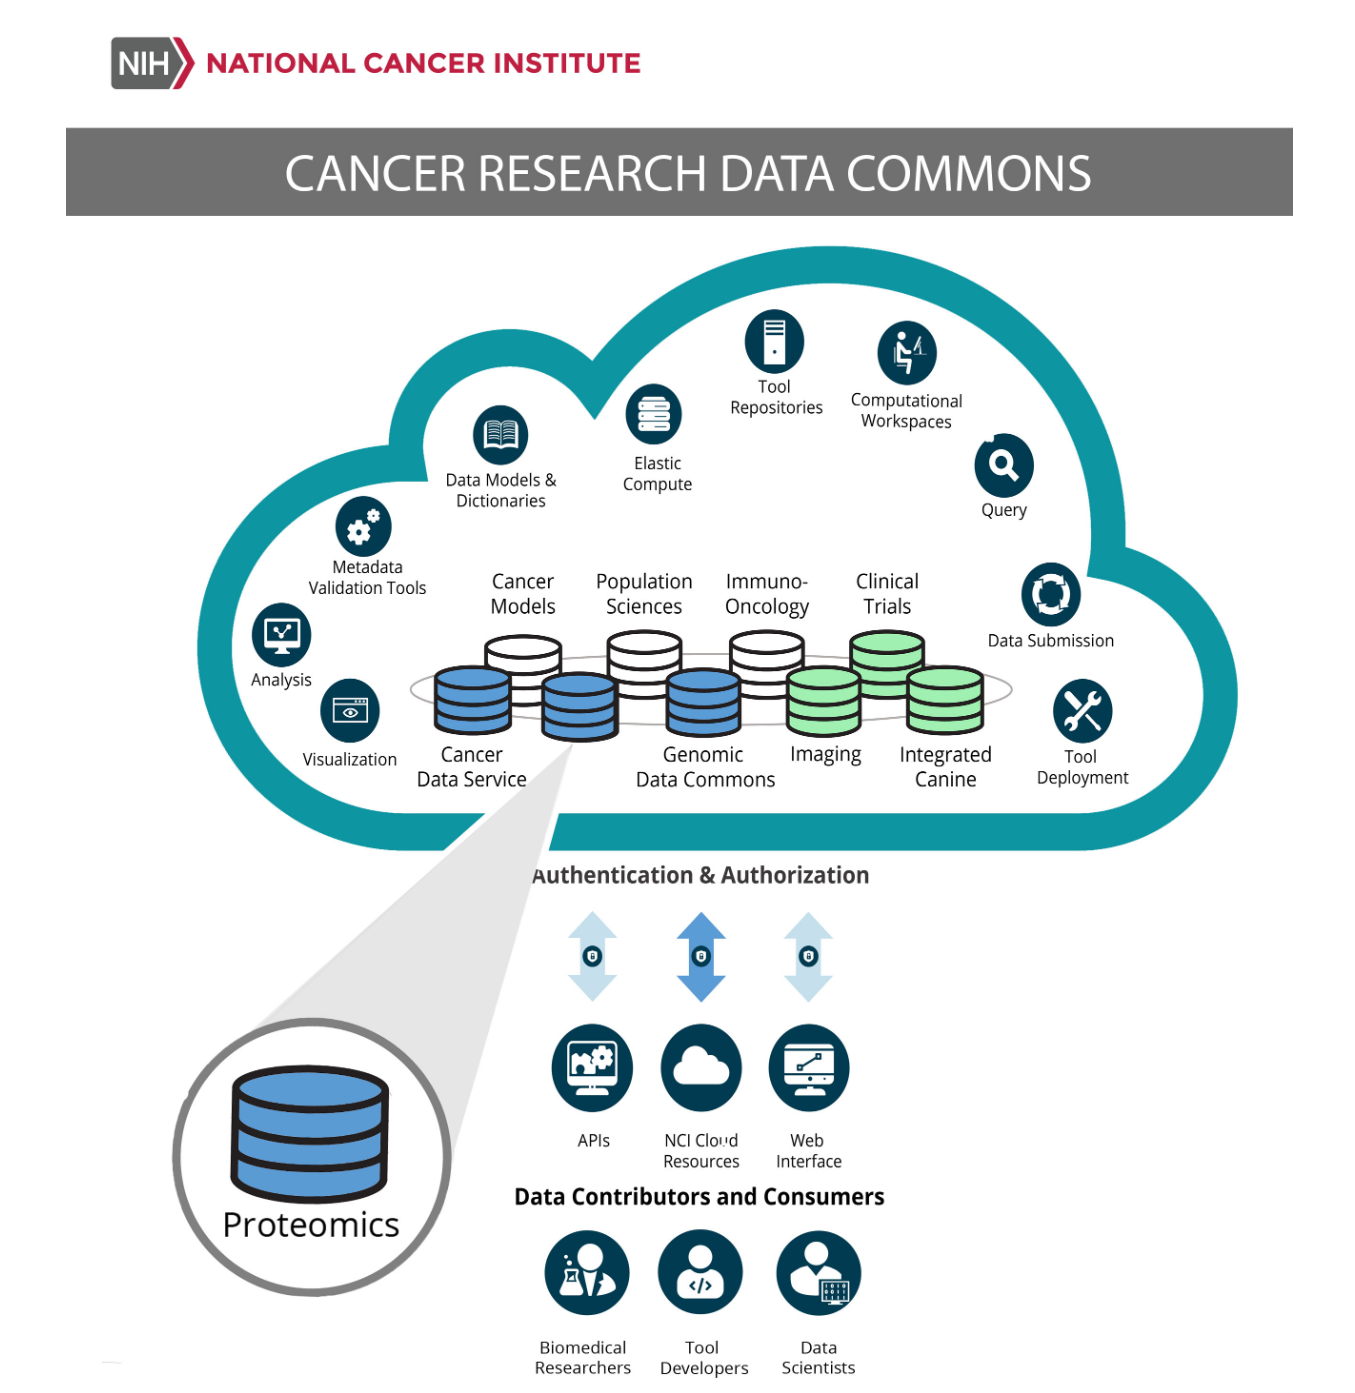 The NCI Cancer Research Data Commons (CRDC) provides biomedical researchers, tool developers, and data scientists with access to data from NCI programs through the nodes like the Proteomics Data Commons. The CRDC allows users to analyze, share, and store results, and is growing to include a wider range of data, including proteomics, imaging, and canine.